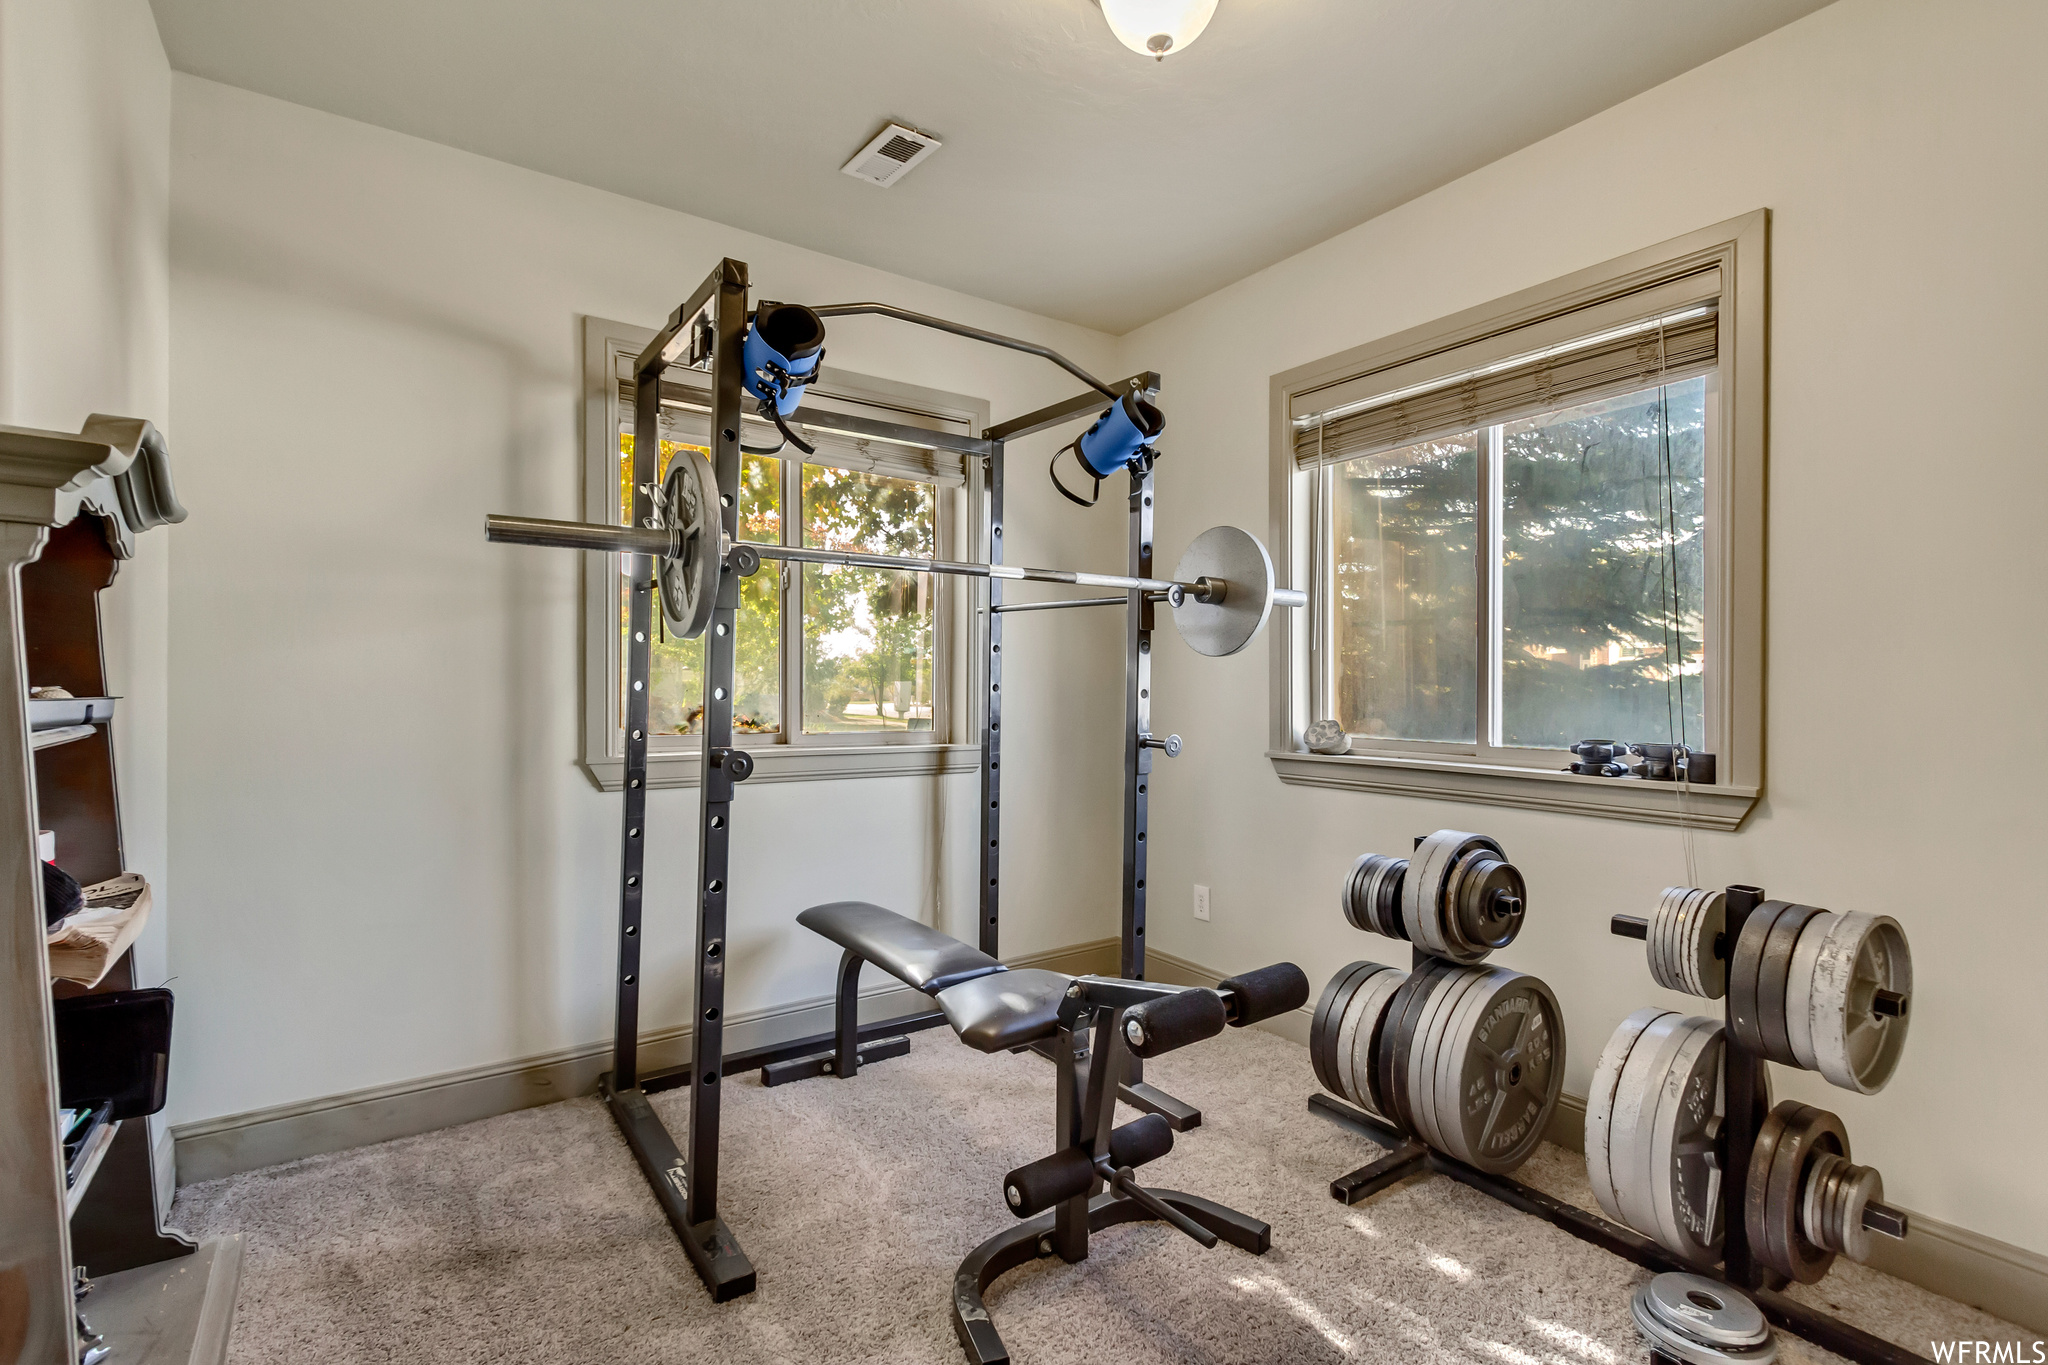 Workout room with carpet flooring and a healthy amount of sunlight